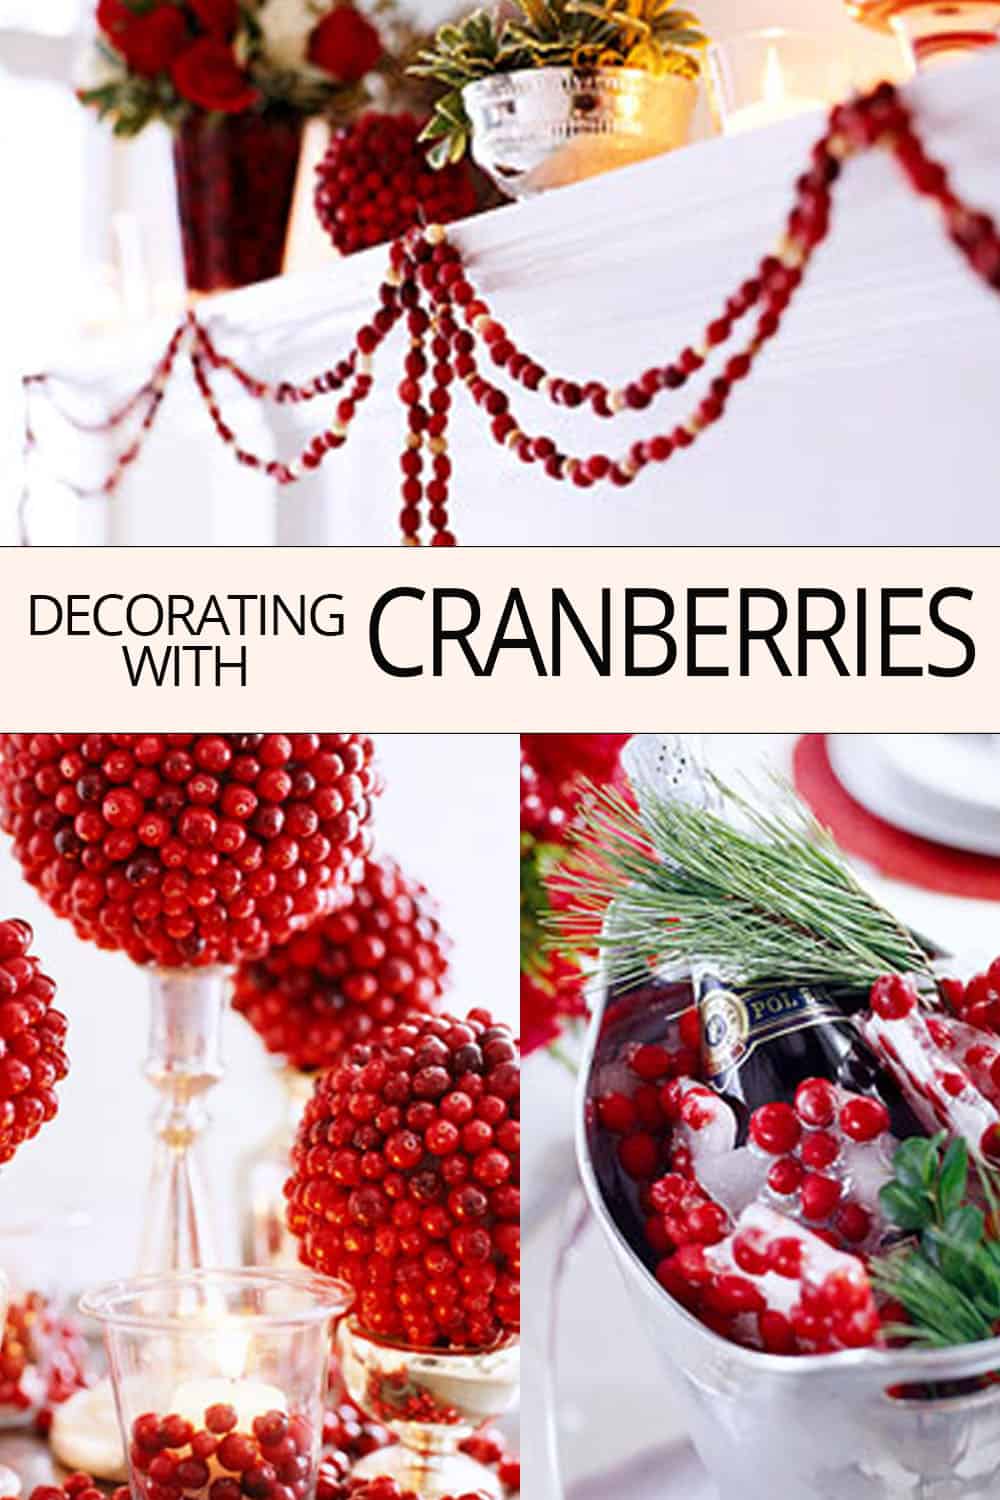 3 Ways to Use Cranberries in Your Christmas Decor - Tonality Designs